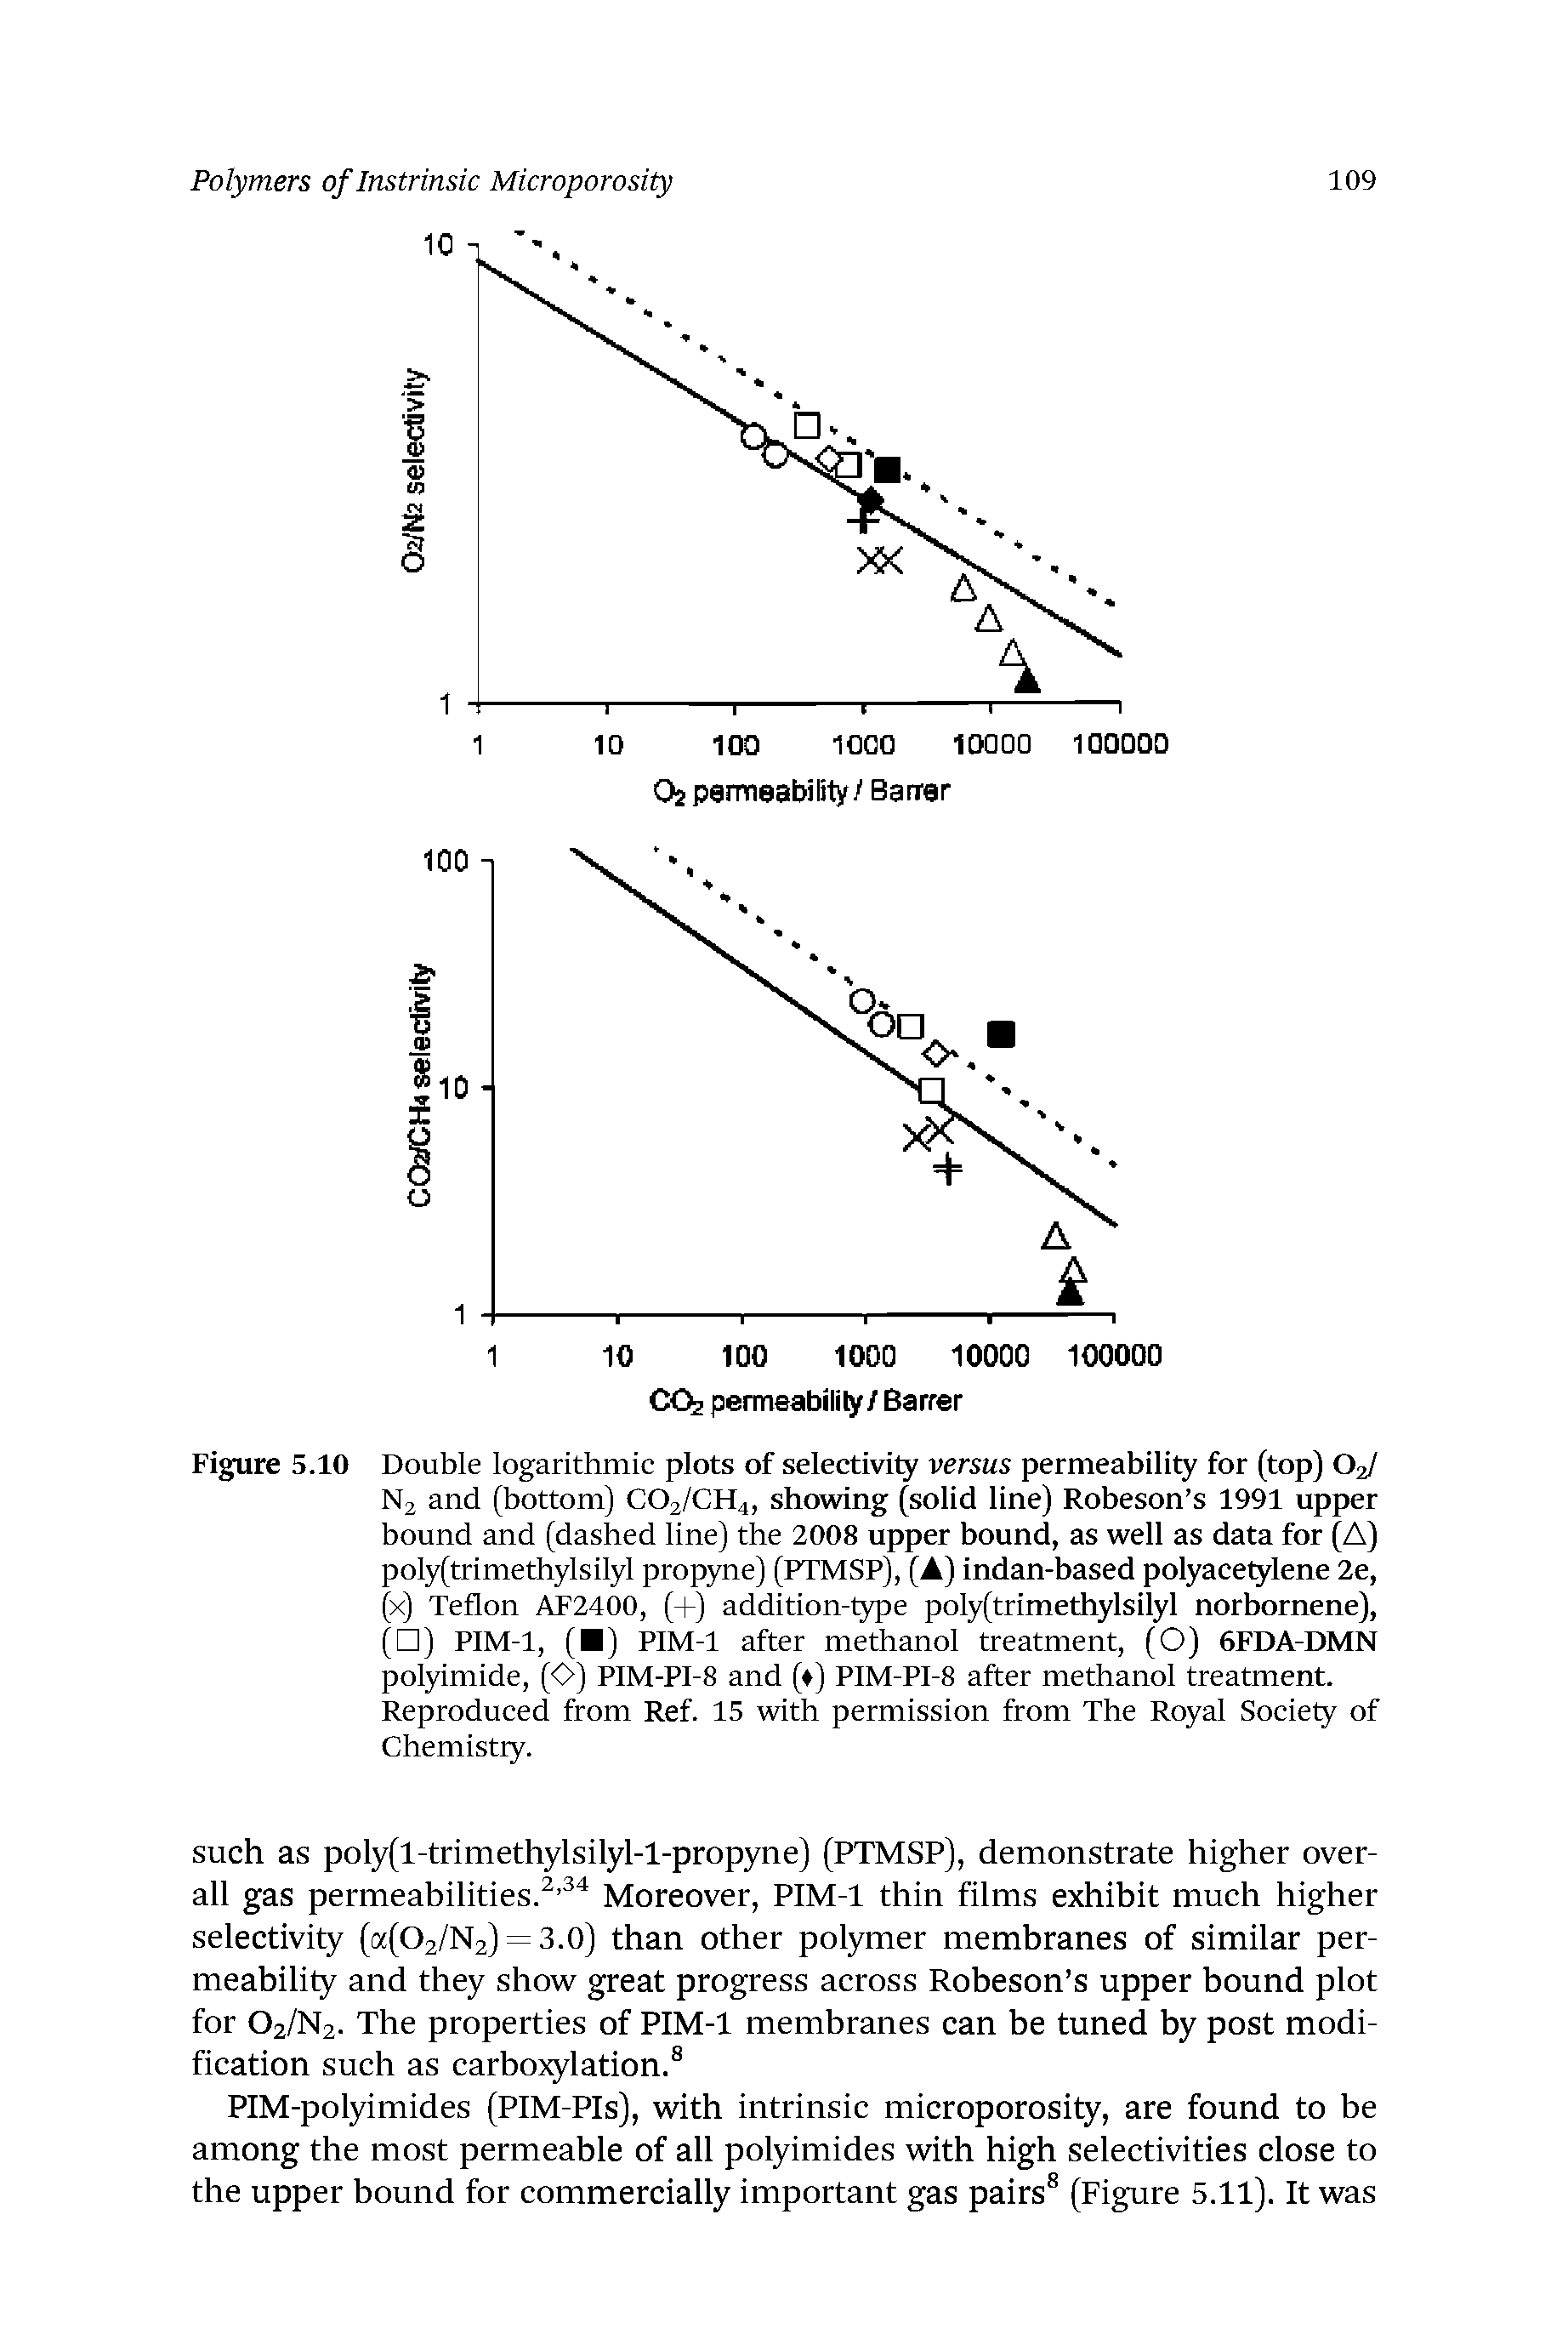 Figure 5.10 Double logarithmic plots of selectivity versus permeability for (top) OJ N2 and (bottom) CO2/CH4, showing (solid line) Robeson s 1991 upper bound and (dashed line) the 2008 upper bound, as well as data for (A) pol (trimethylsilyl prop me) (PTMSP), (A) indan-based polyacetylene 2e, (x) Teflon AF2400, (+) addition-type poly(trimethylsilyl norbornene), ( ) PIM-1, ( ) PIM-1 after methanol treatment, (O) 6FDA-DMN pol dmide, (O) PIM-PI-8 and ( ) PIM-PI-8 after methanol treatment. Reproduced from Ref. 15 with permission from The Royal Society of Chemistry.